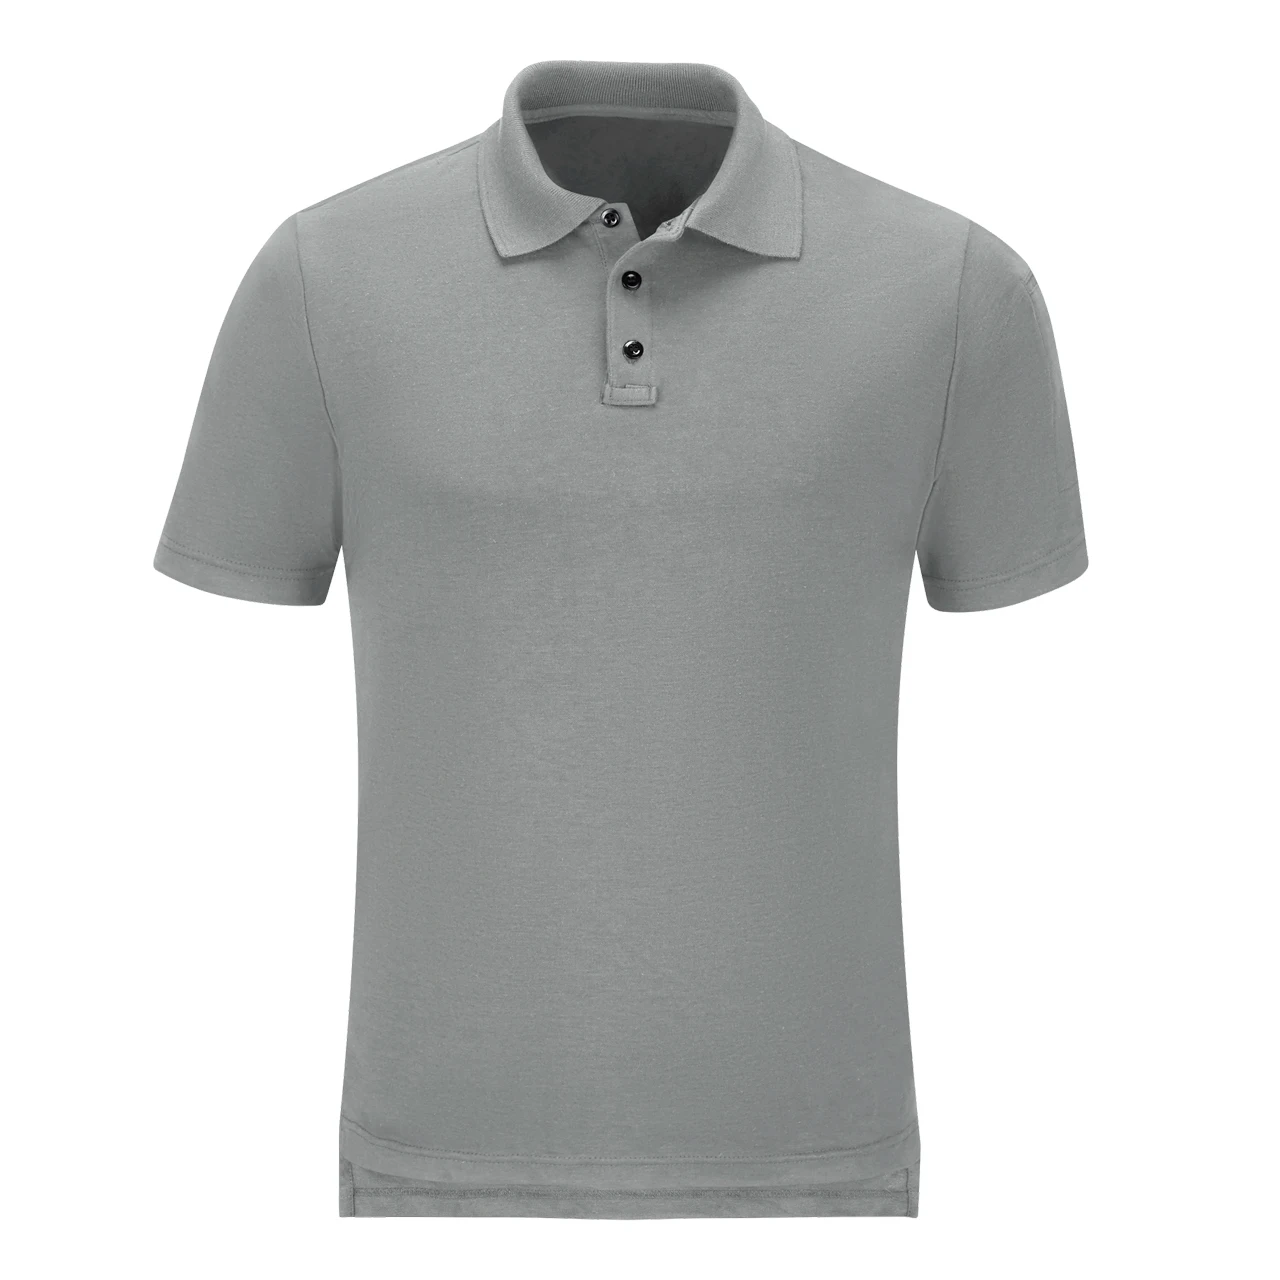 directory ~ kant Stamboom Polo Shirts Nieuwe Ontwerp Best Selling Lente Zomer Mannen Mode Polo Shirts  Custom Logo Polo T-shirt - Buy Racing Polo Shirts,Kerst Polo Shirt,Bowling Polo  Shirts Product on Alibaba.com